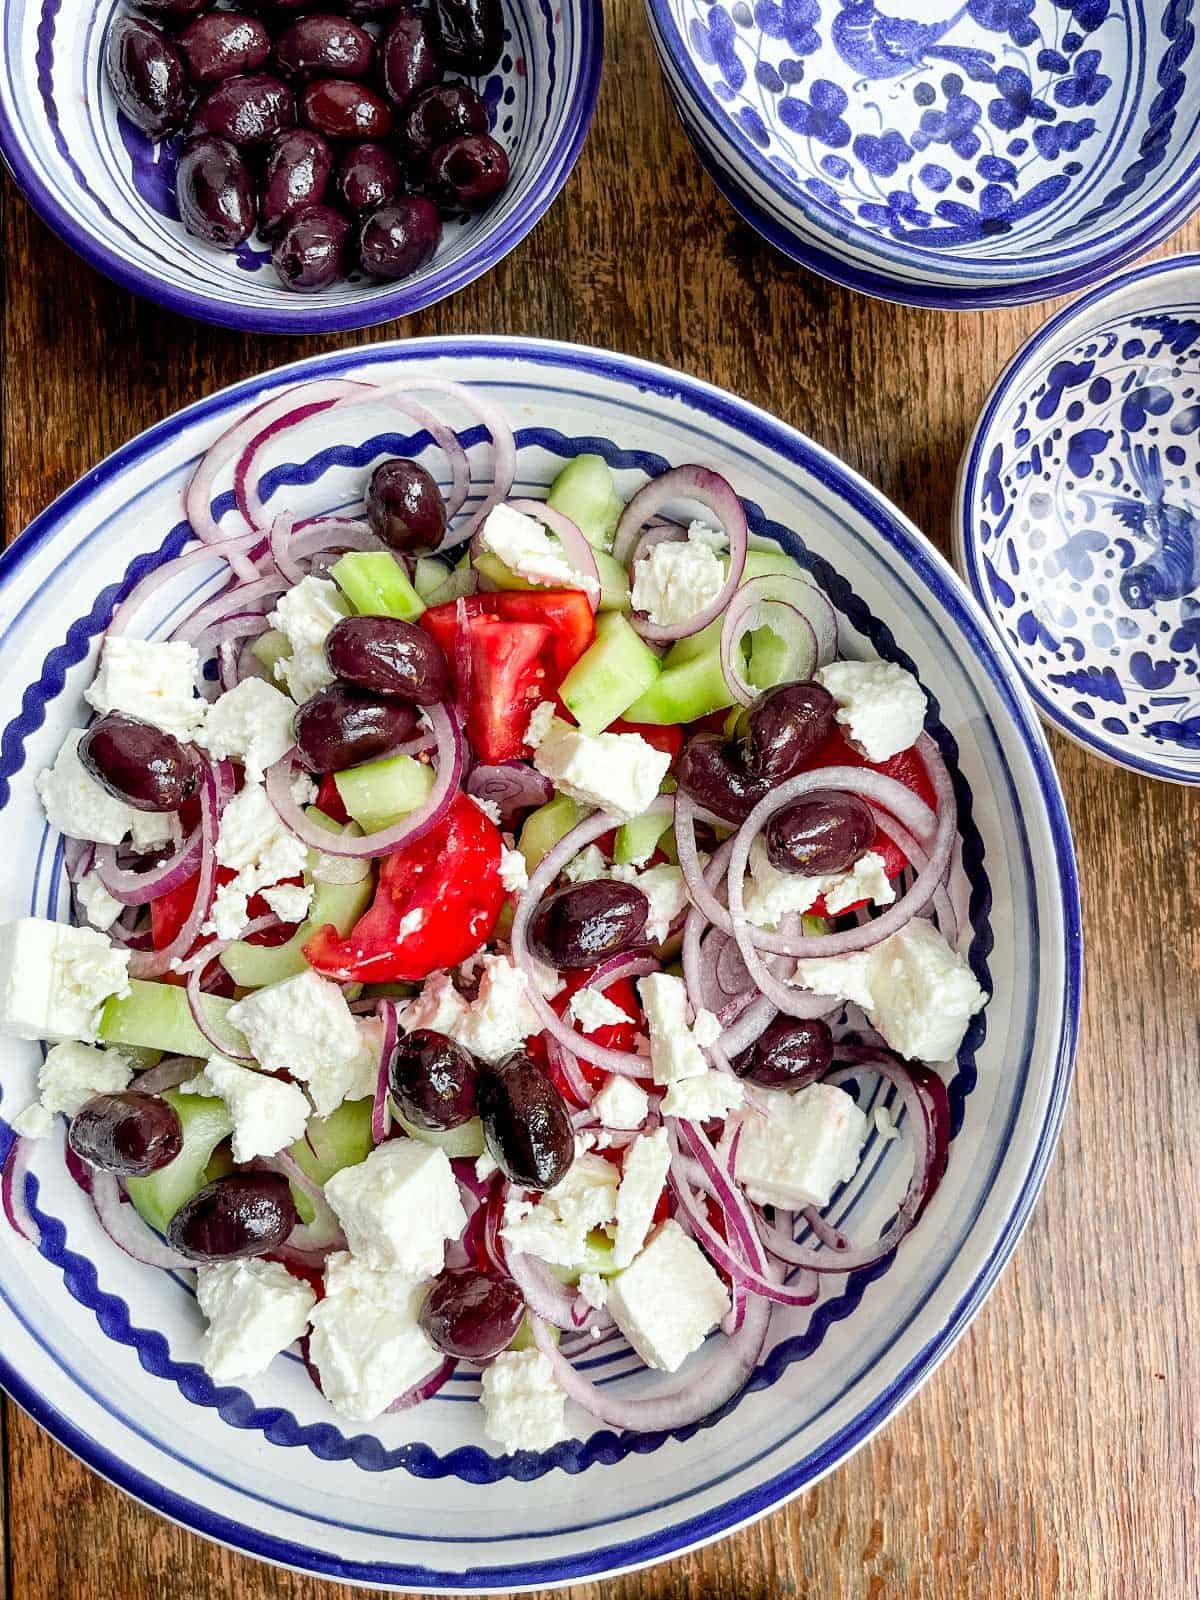 A bowl of greek salad on a wooden table with 3 smaller painted bowls.